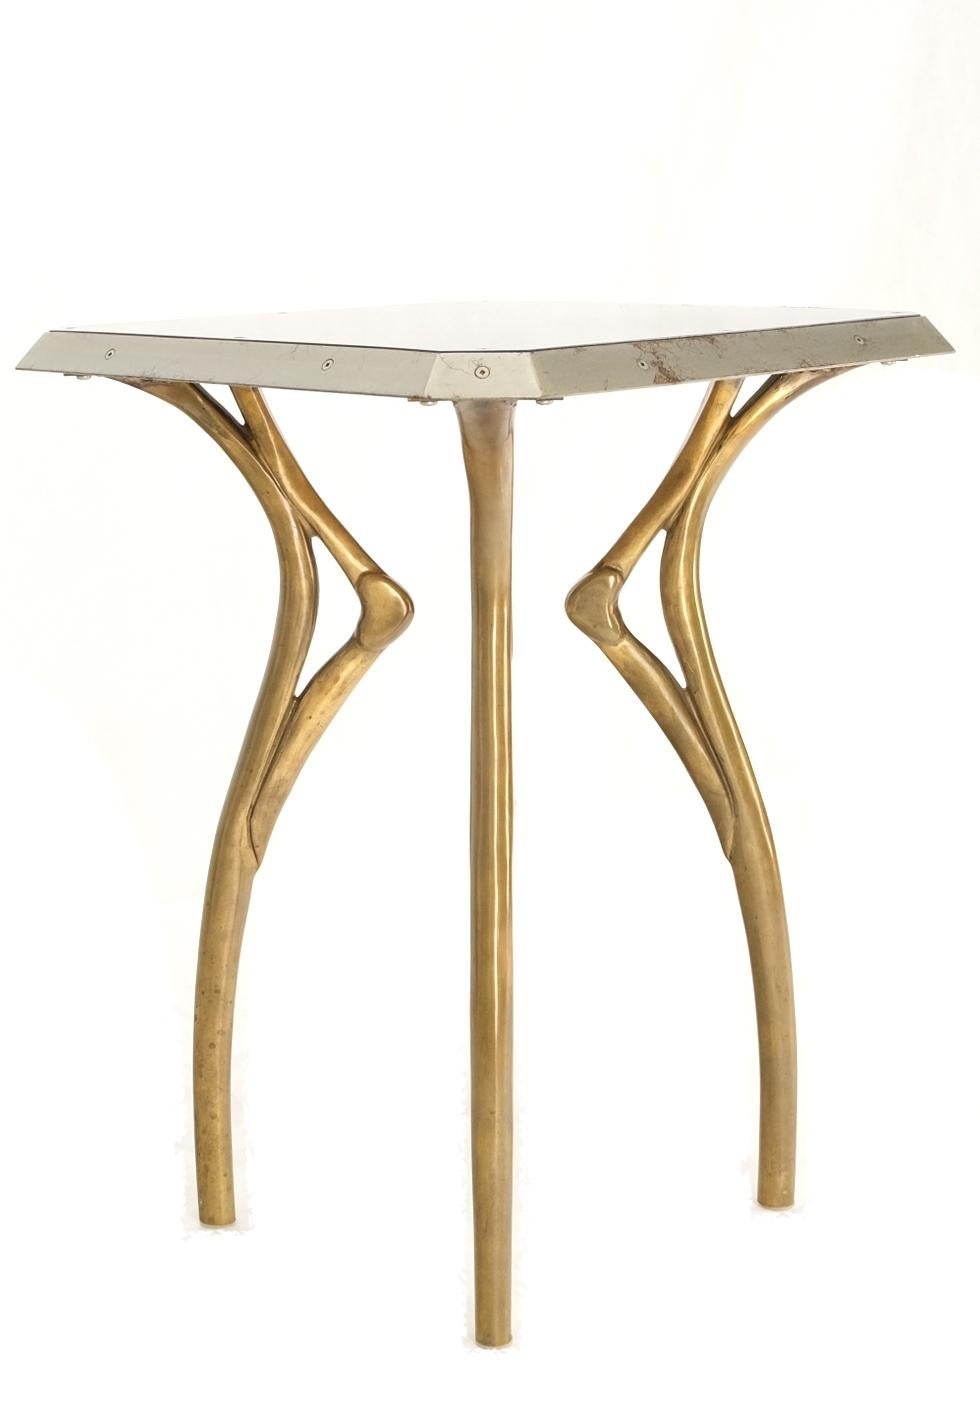 American Heavy Cast Bronze Legs Studio Made Sculptural Side Cafe Petit Dining Table Stand For Sale